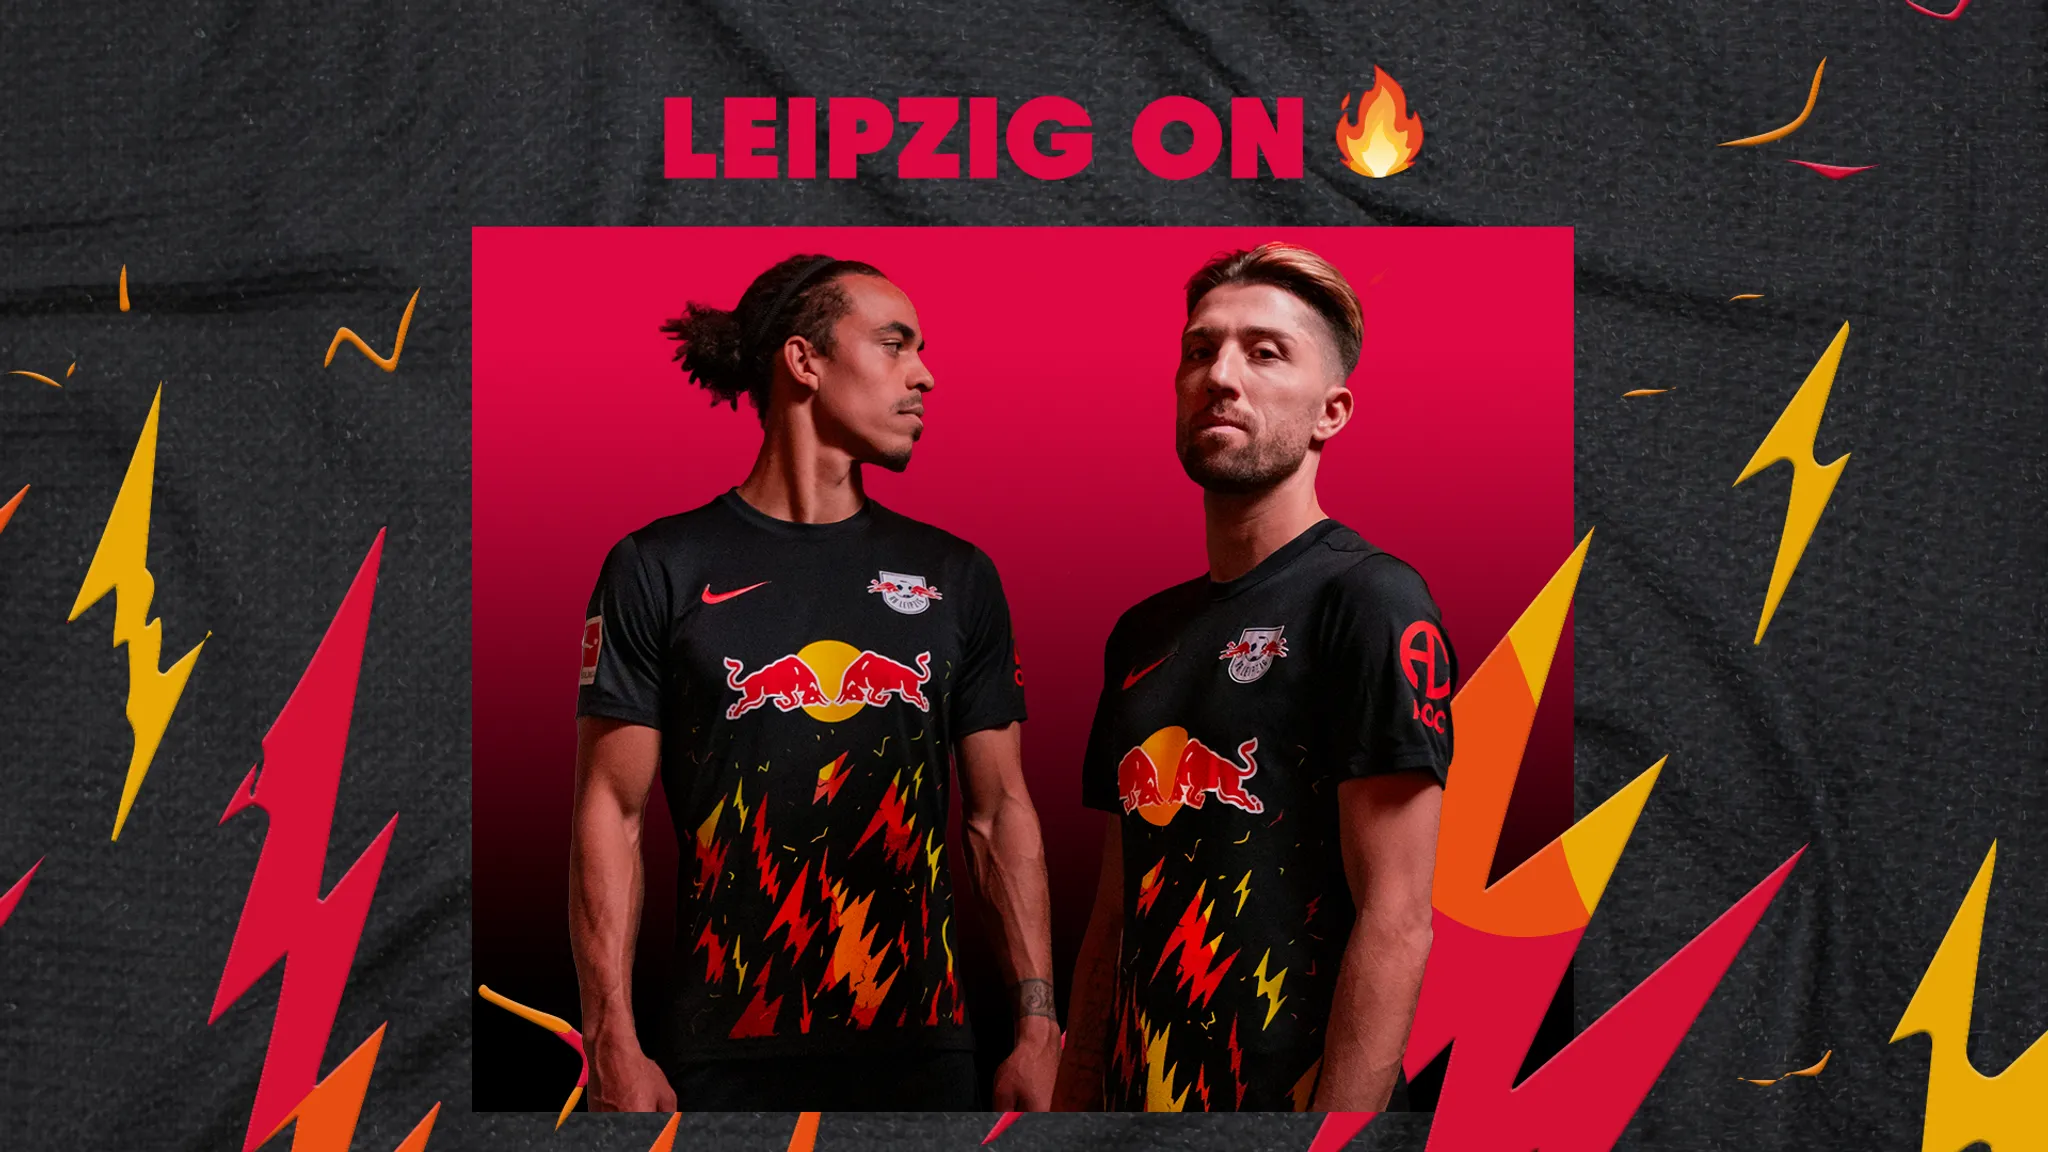 The Black special jersey from RB Leipzig